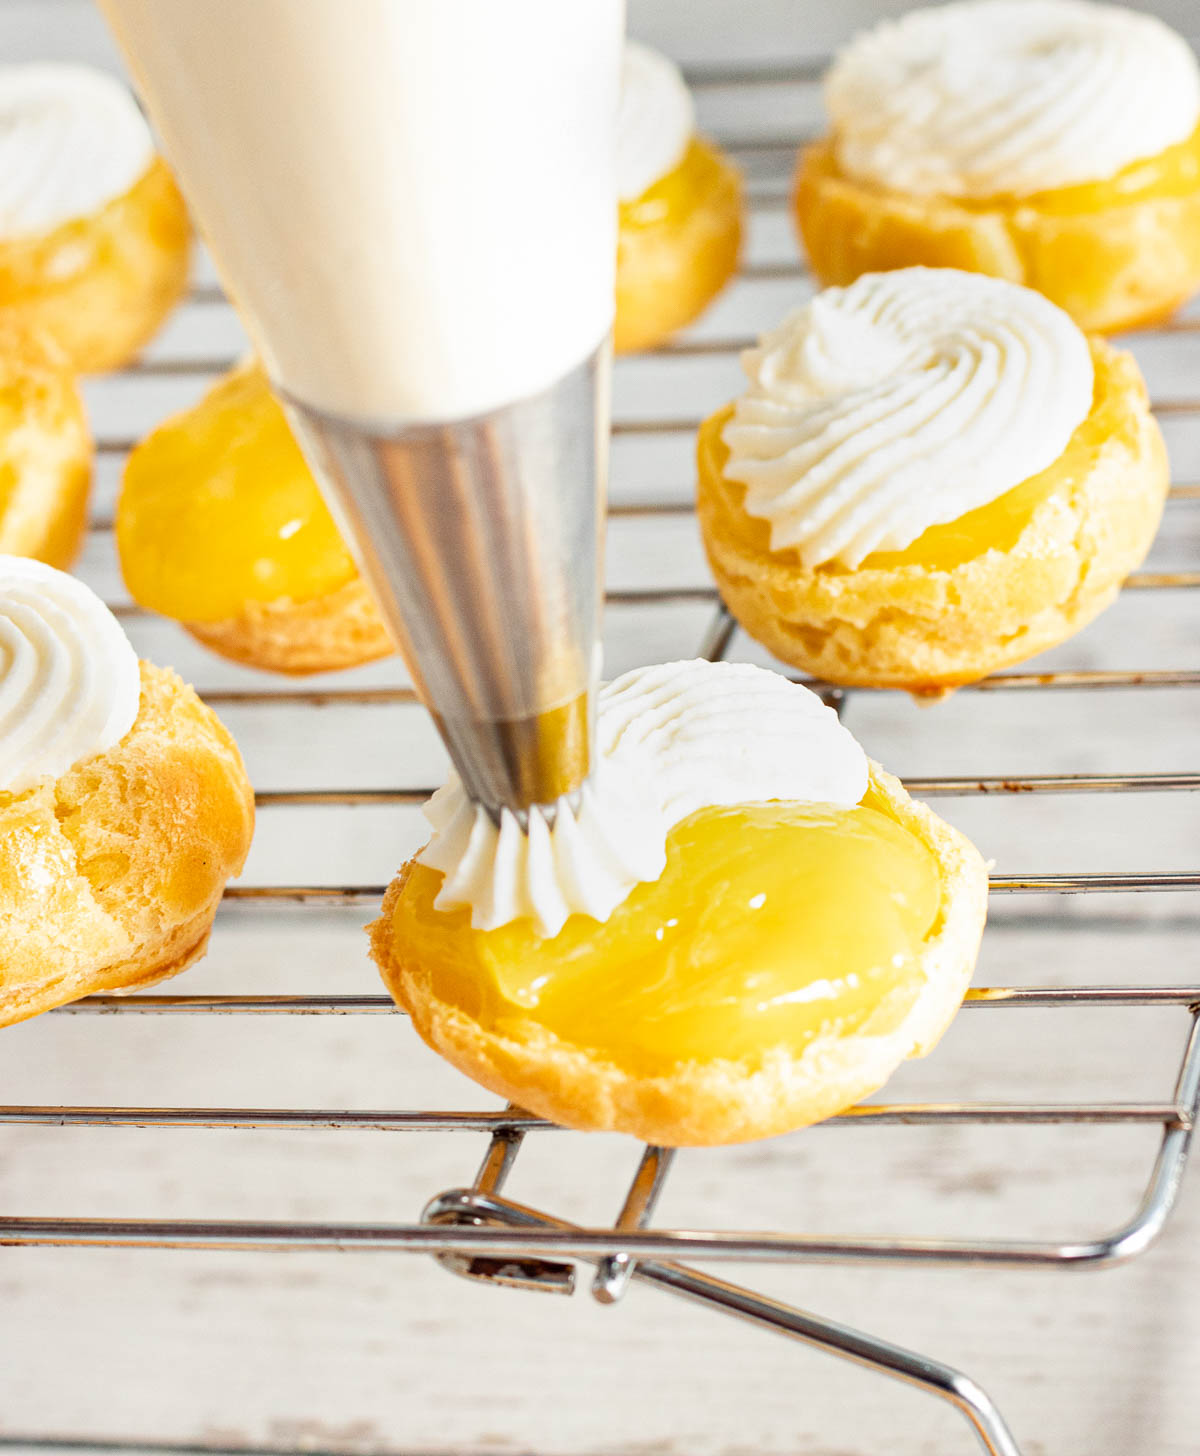 Piping cream cheese filling into cream puffs.